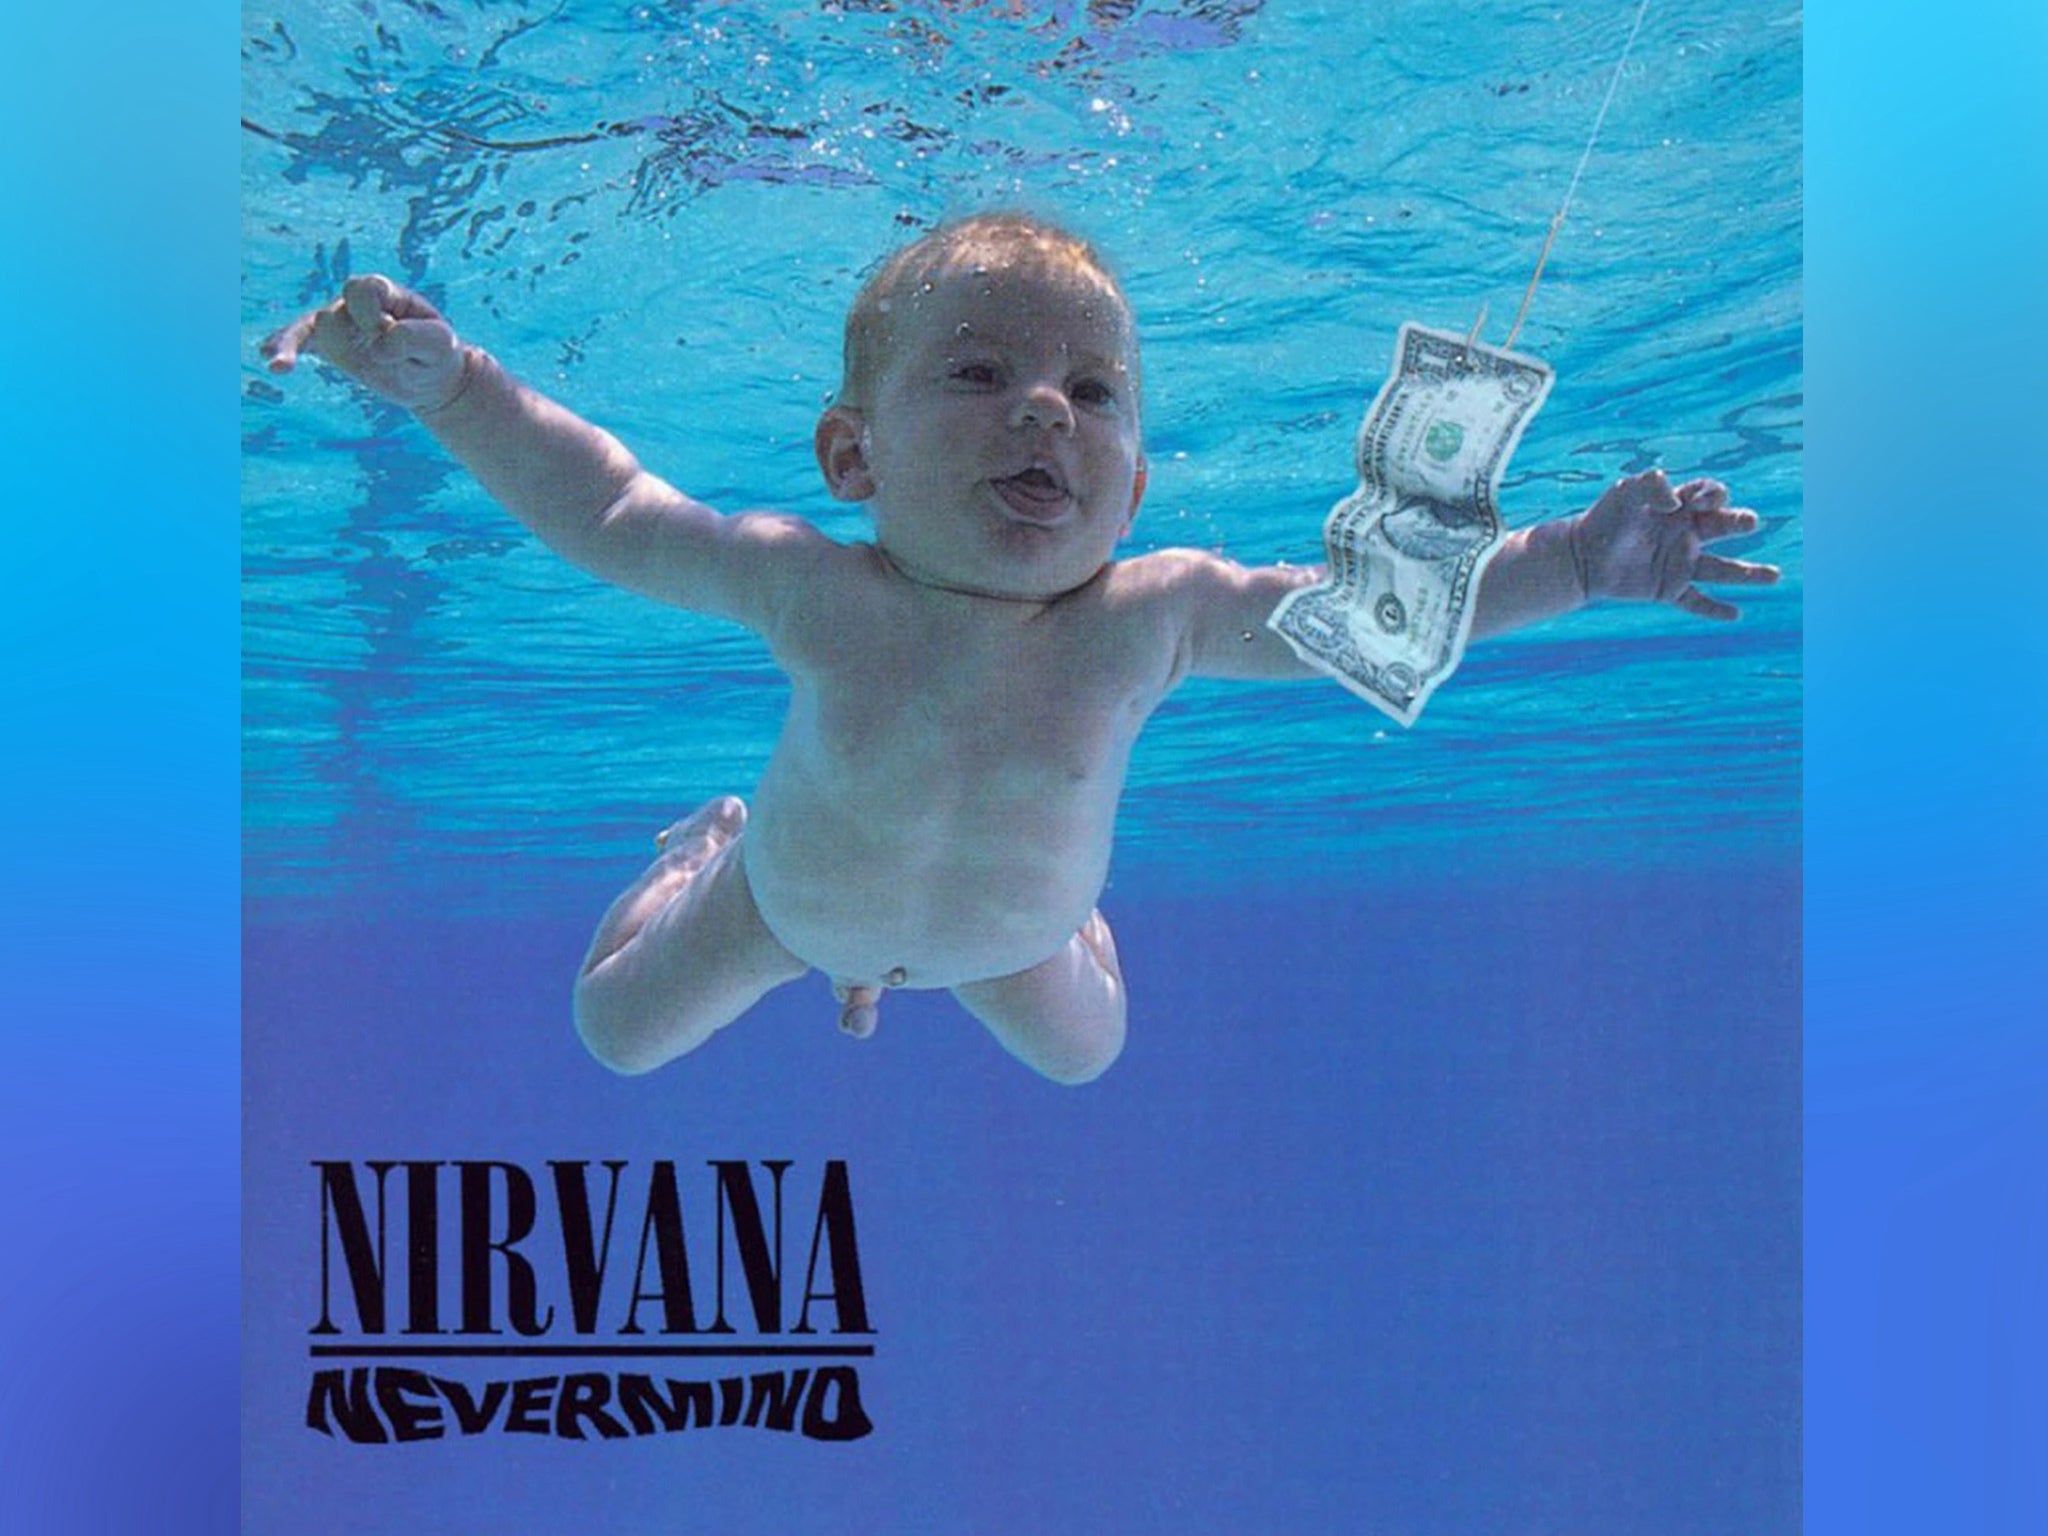 Nirvana’s album cover for 1991’s ‘Nevermind’